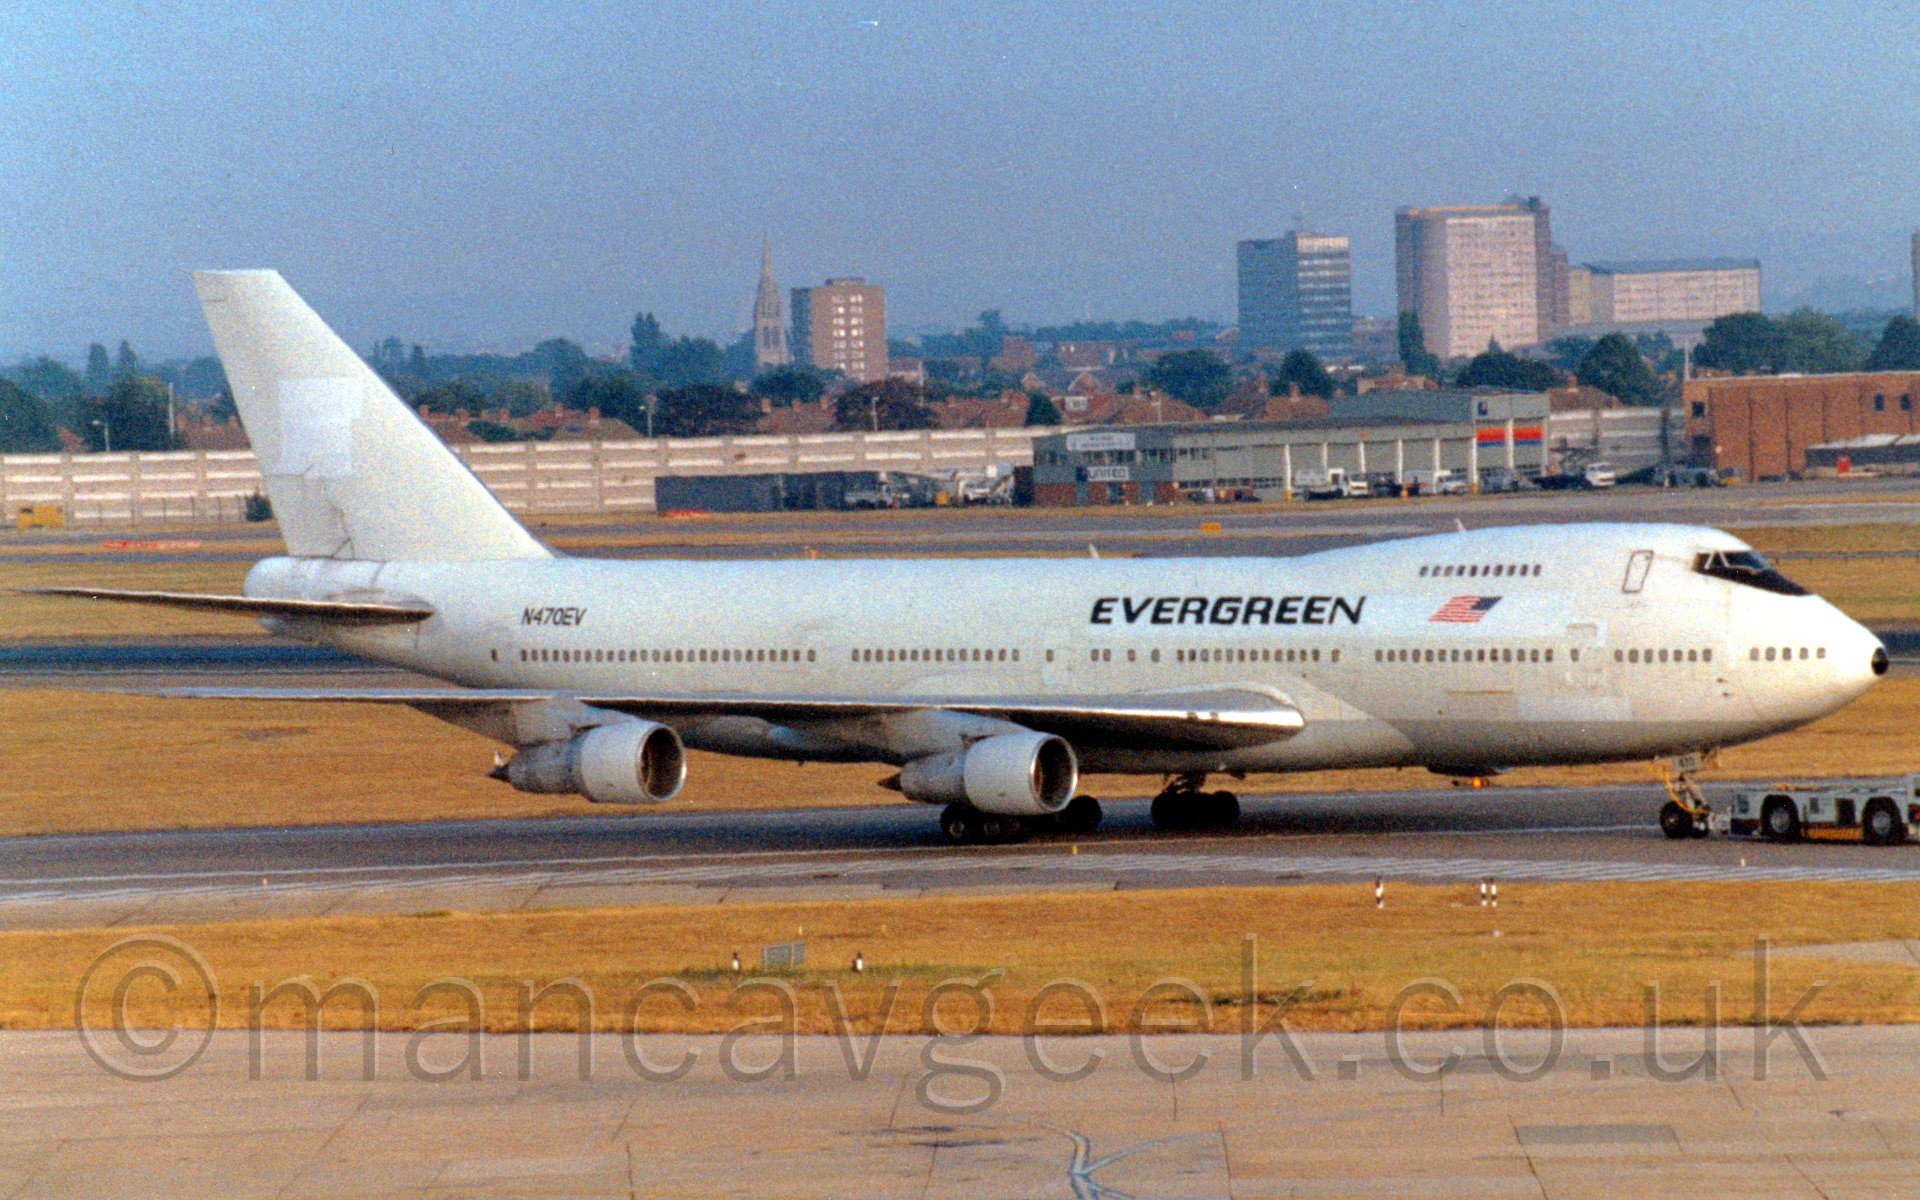 Side view of a very large 4 engined passenger airliner being towed from left to right on a taxiway by a dark blue and grey tug. The plane is mostly white, with the top of the nose cone painted black, a reversed US flag between the upper and lower deck windows on the forward fuselage, and large black "Evergreen" titles over the front of the wings. The registration "N470EV" is painted prominently on the upper rear fuselage. In the background, a grey building is right up against a large concrete retaining wall, with houses, a church, and some tower blocks behind it, under a blue-grey sky.